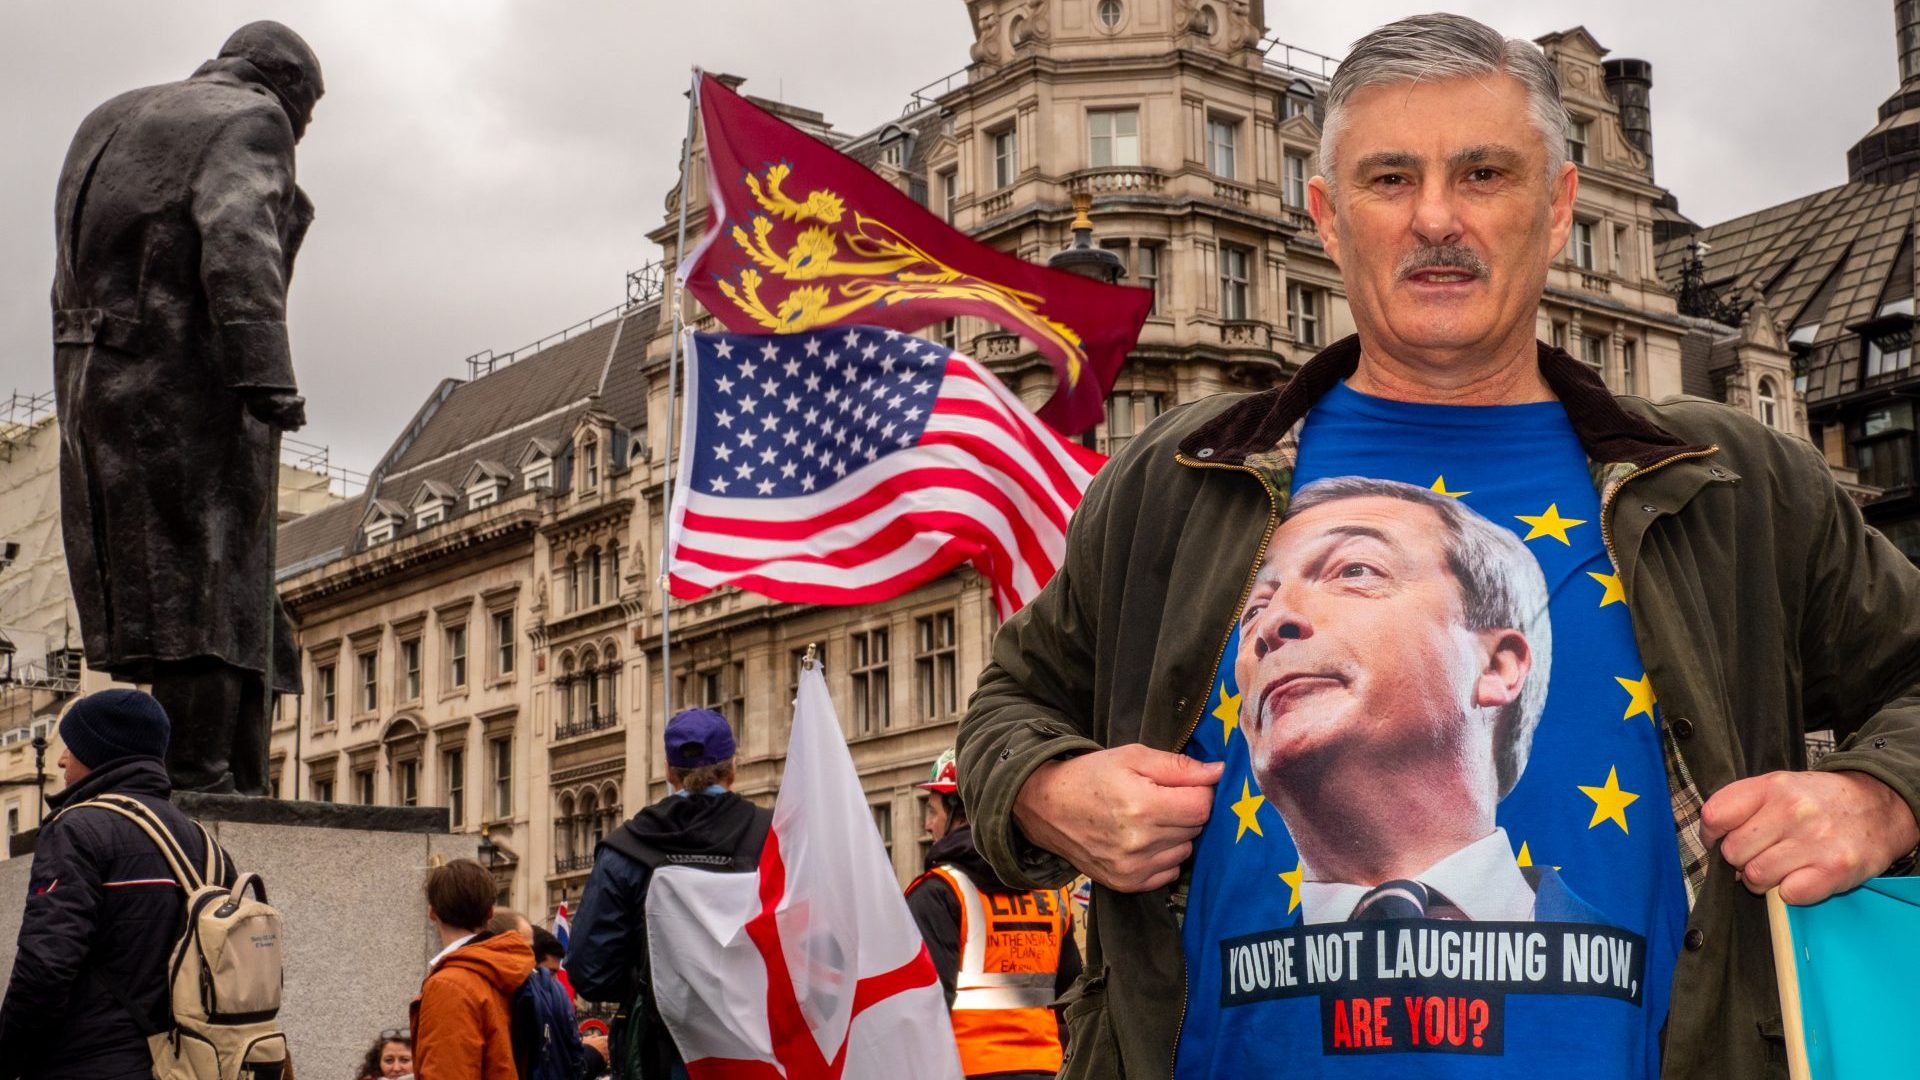 A Nigel Farage fan shows off his wardrobe on January 31, 2020, as the UK prepared to leave the EU. Photo: Peter Dench/Getty